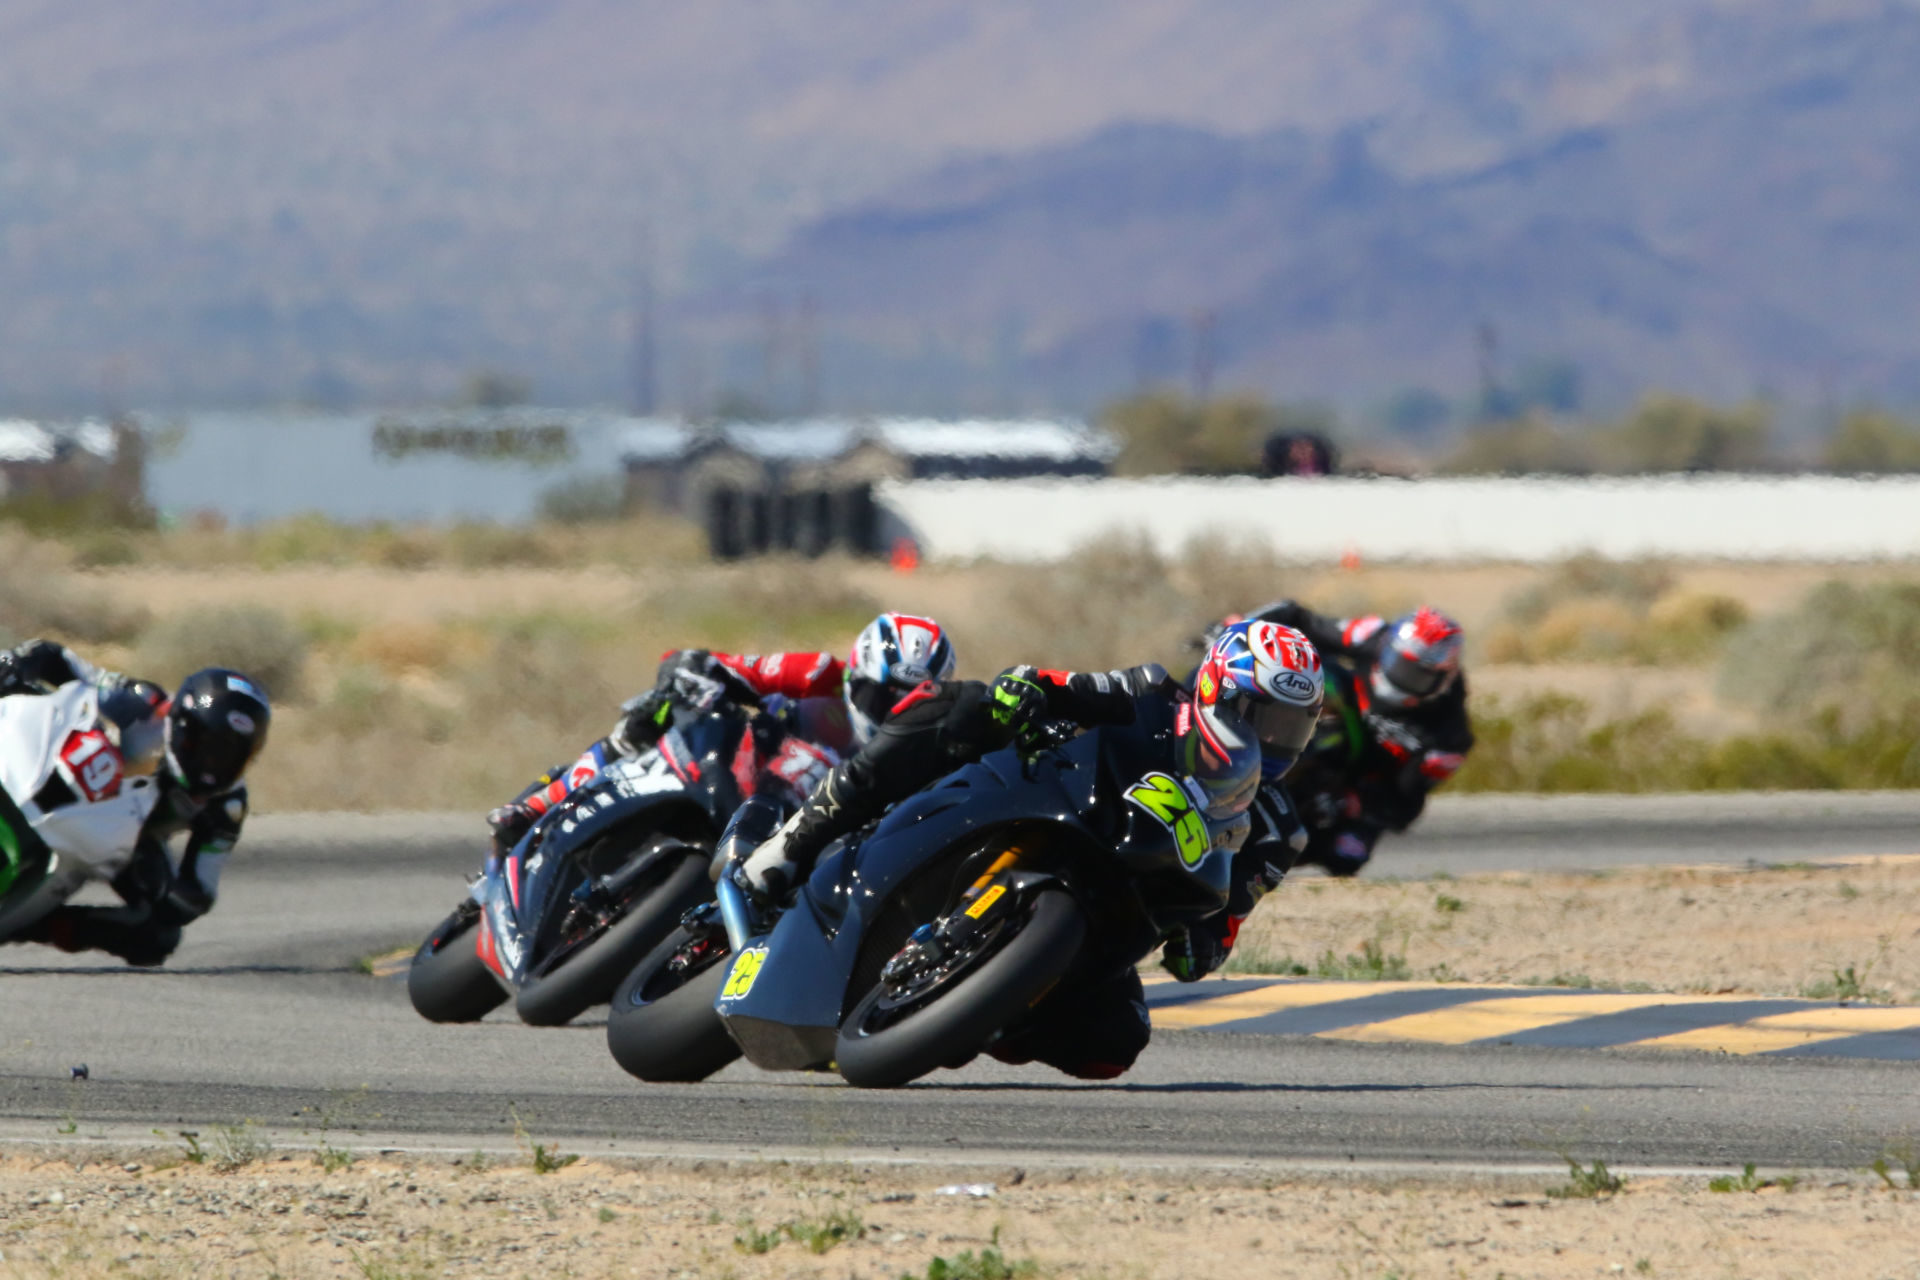 David Anthony (25) leads Bradley Ward (757), and Wyatt Farris (19) during The CVMA Shootout, Presented by TrackDaz and SoCal Trackdays at Chuckwalla Valley Raceway. Photo by CaliPhotography.com, courtesy of CVMA.